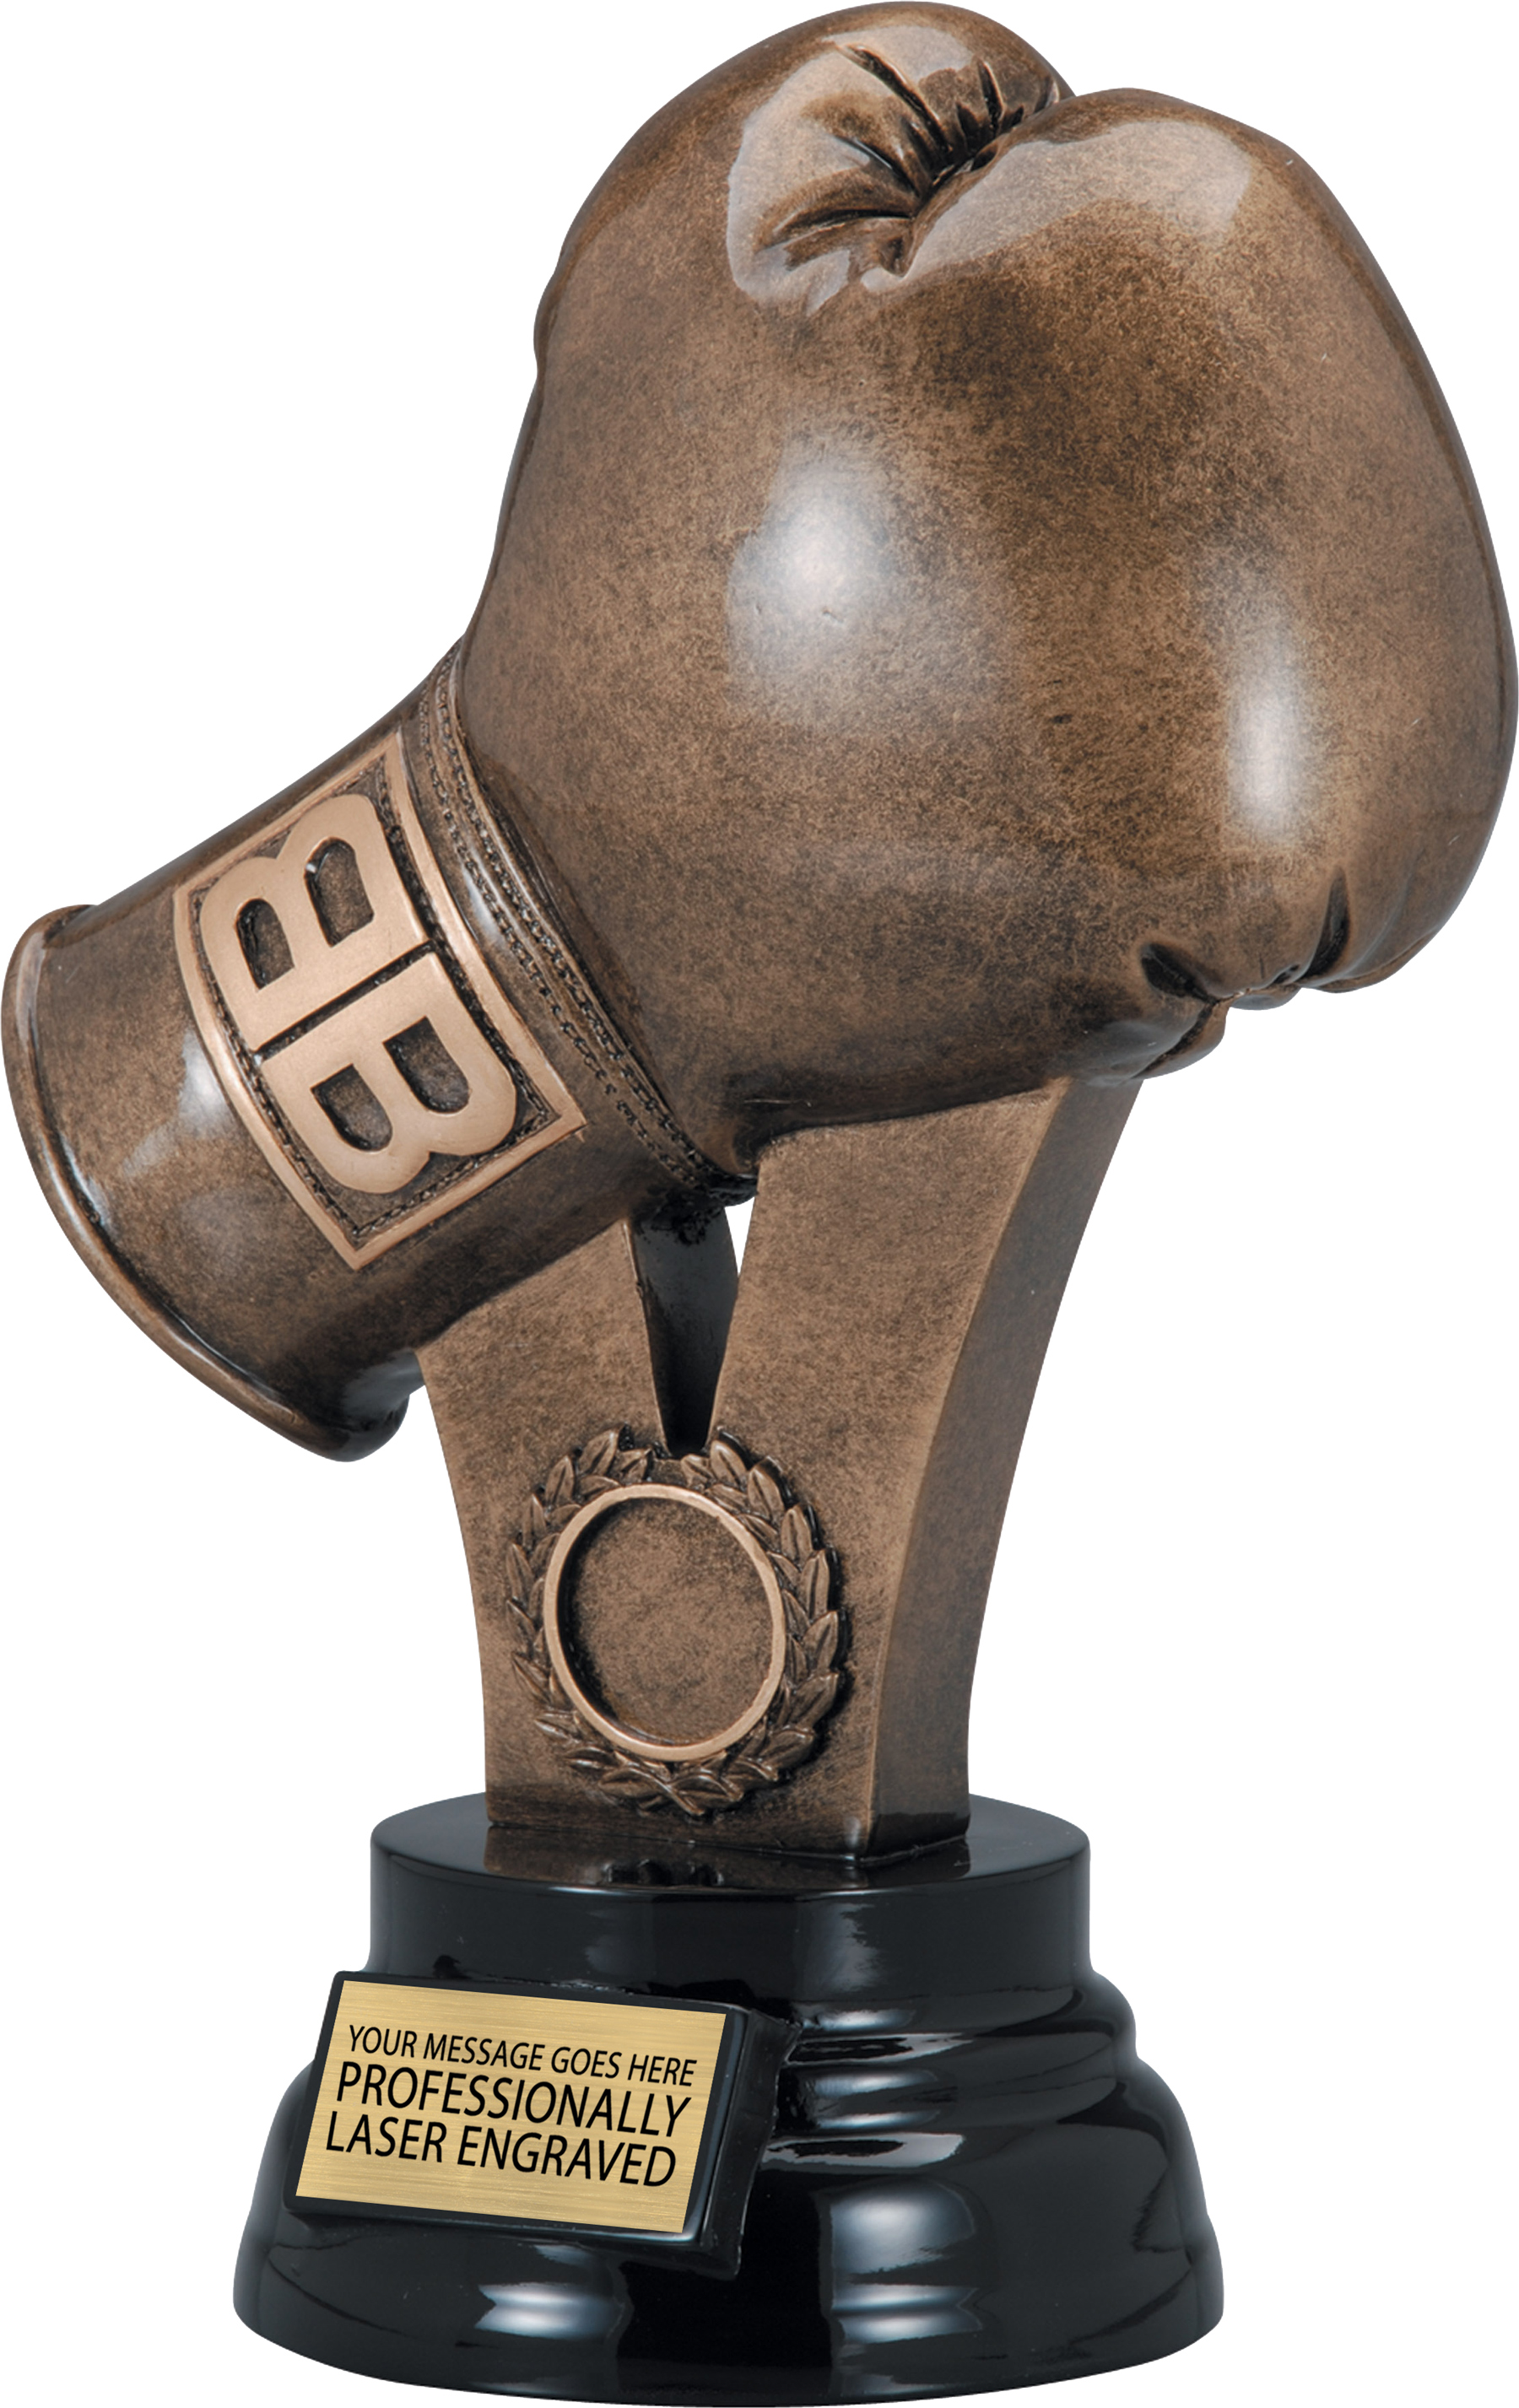 Boxing Glove Resin Trophy - 11 inch